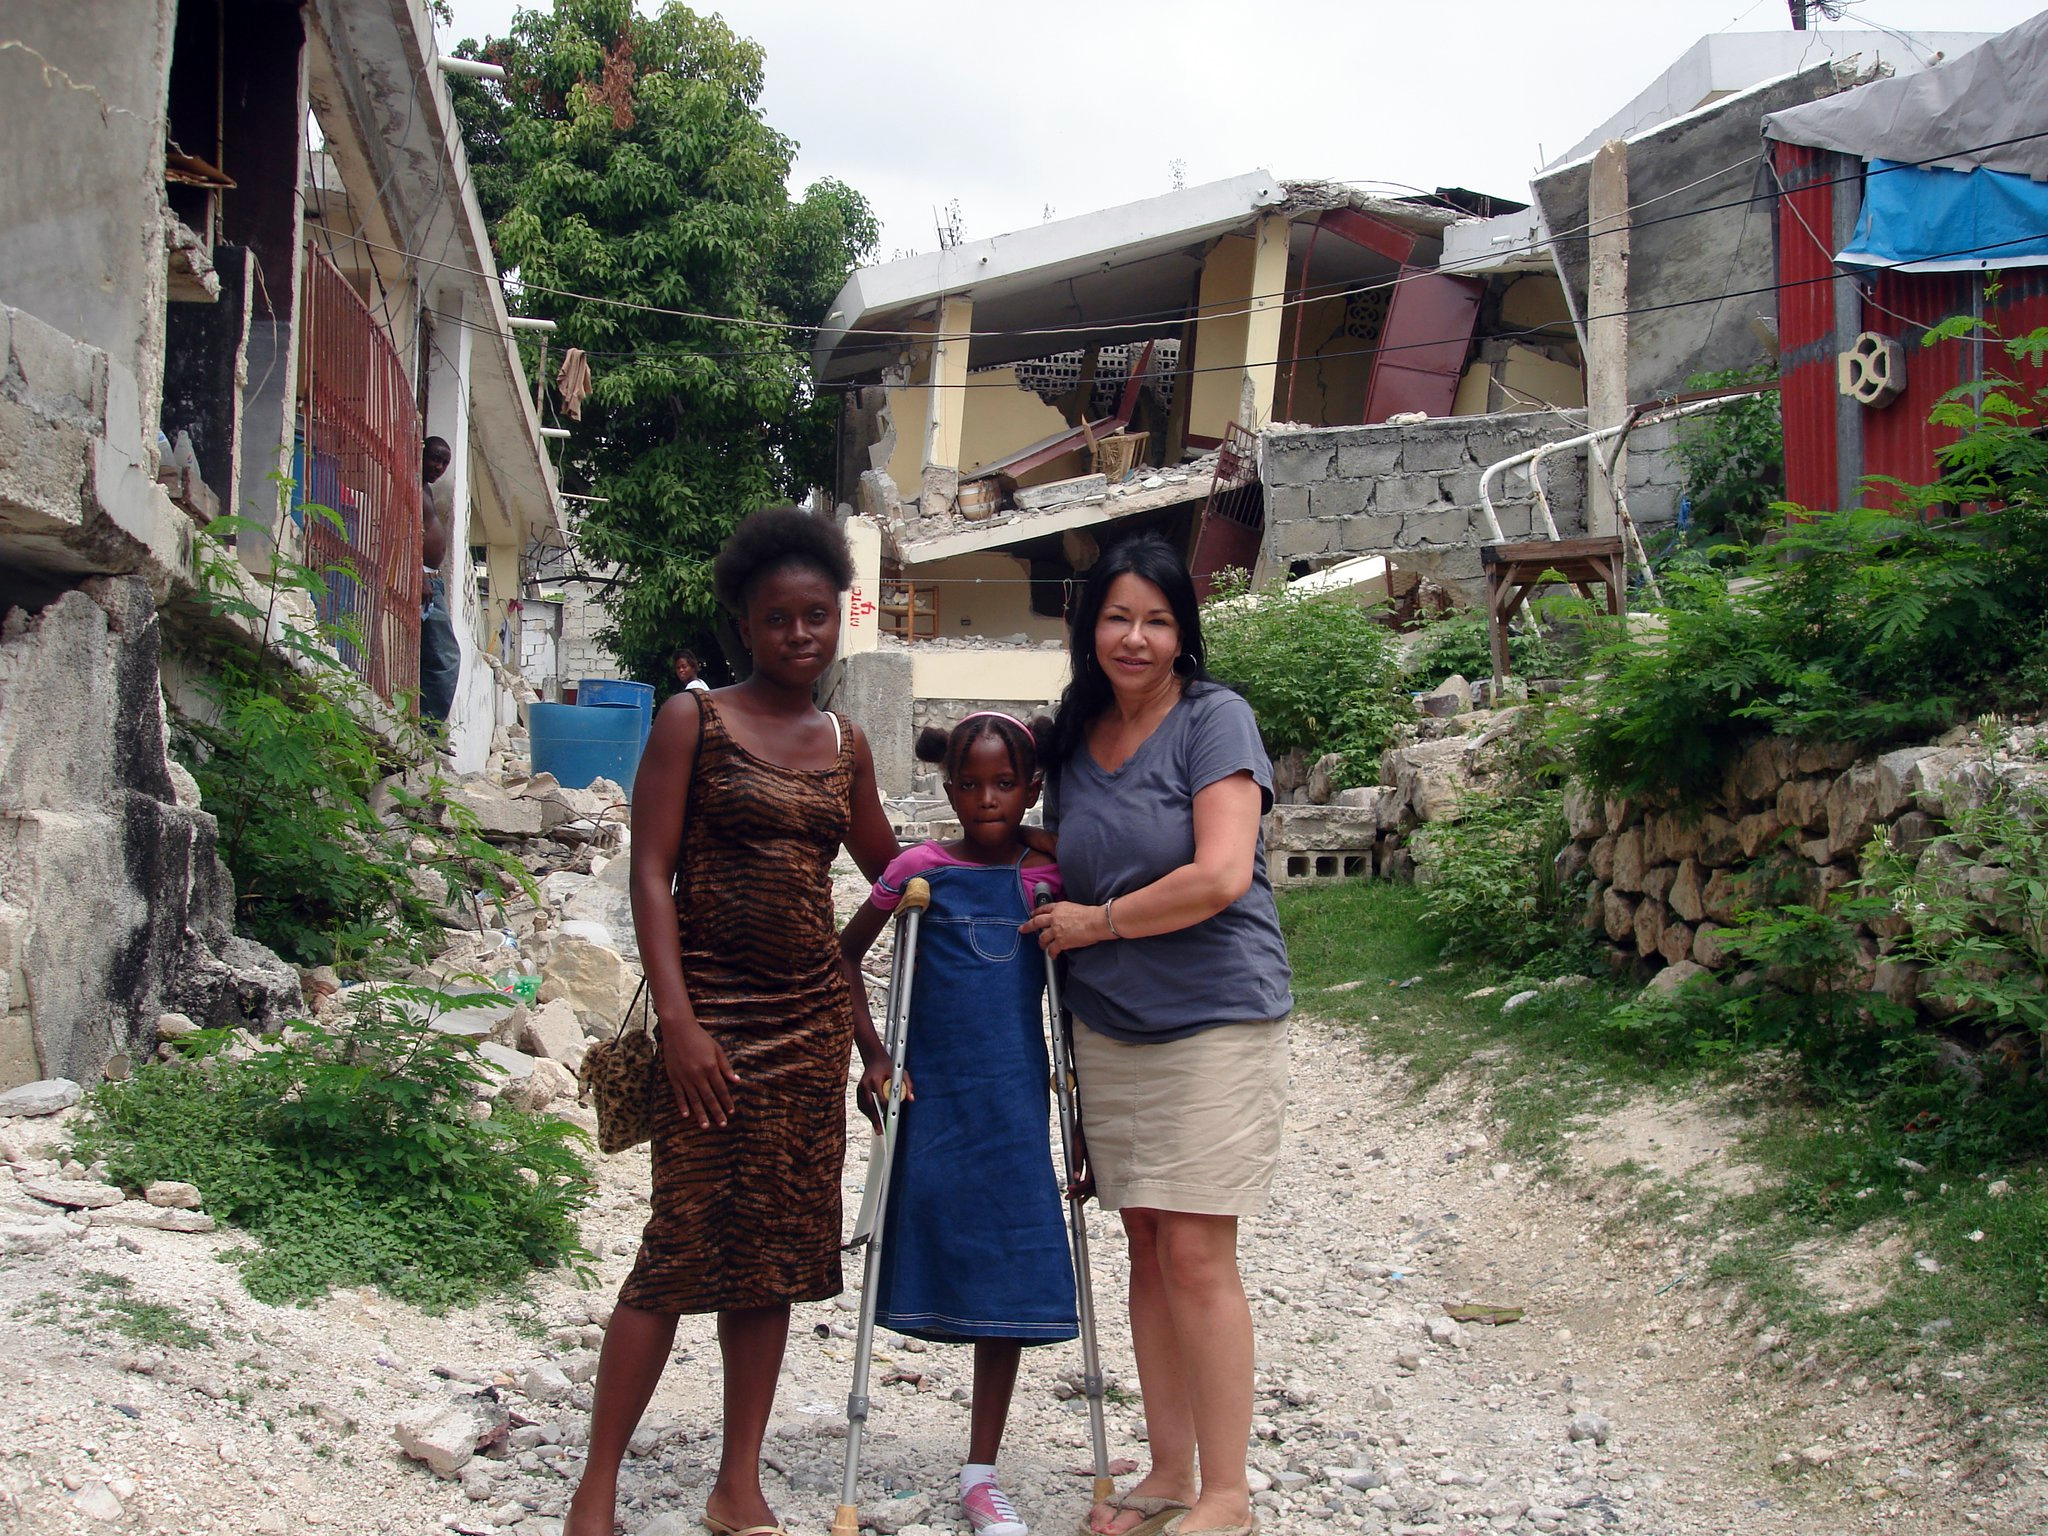 Elissa Montanti (right) is seen in Haiti (credit: Global Medical Relief Fund) 